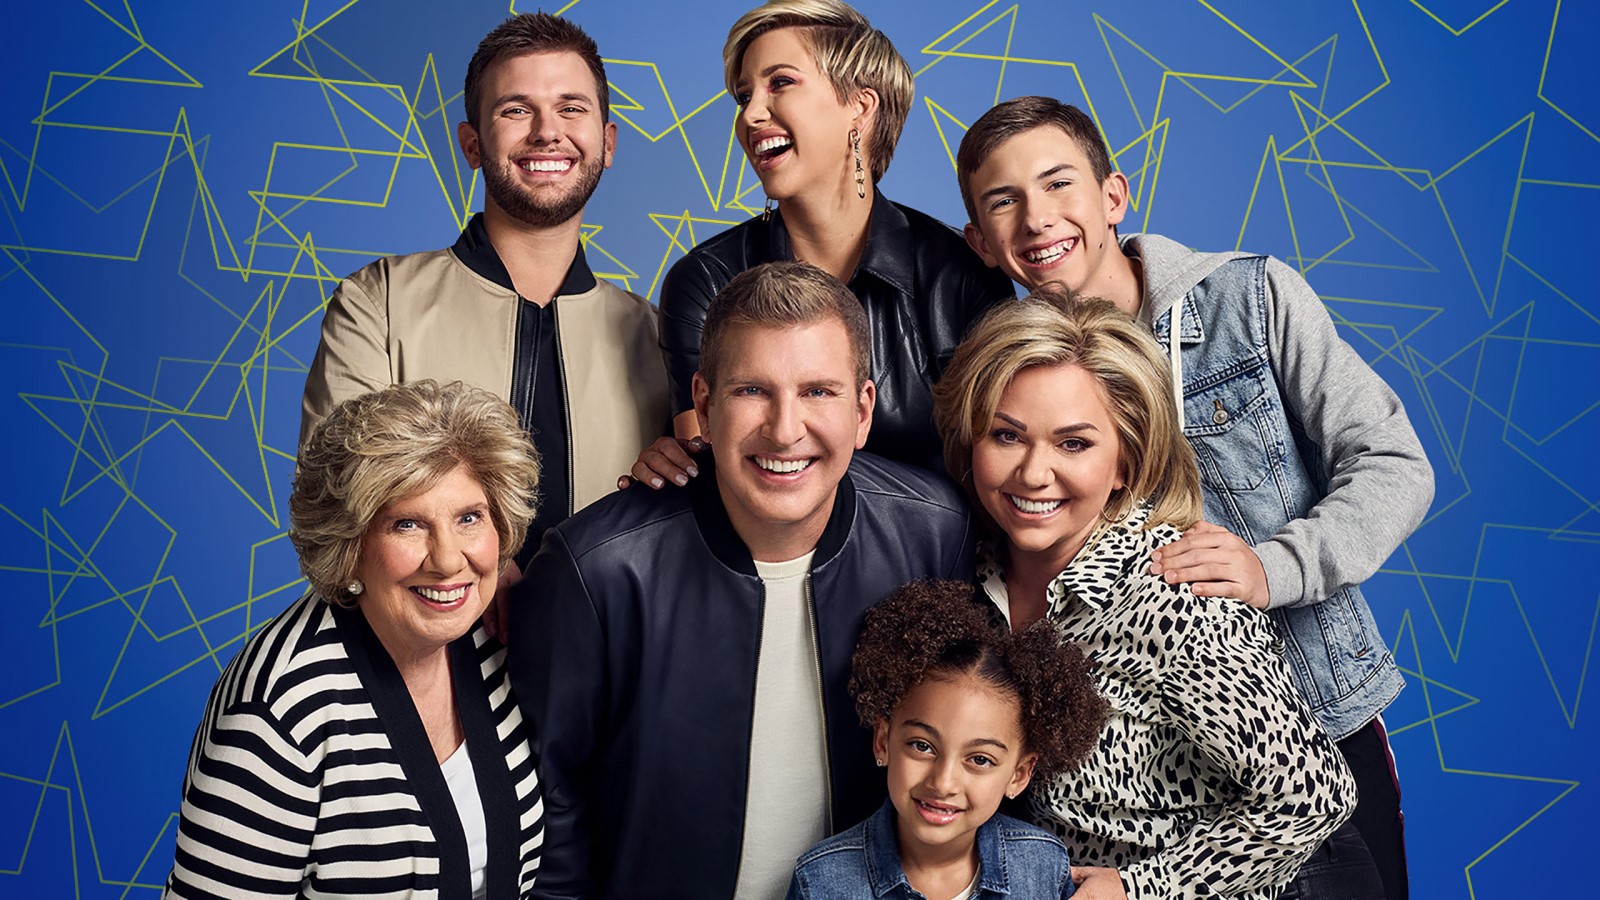 How to Watch 'Chrisley Knows Best' Online - Live Stream Season 8